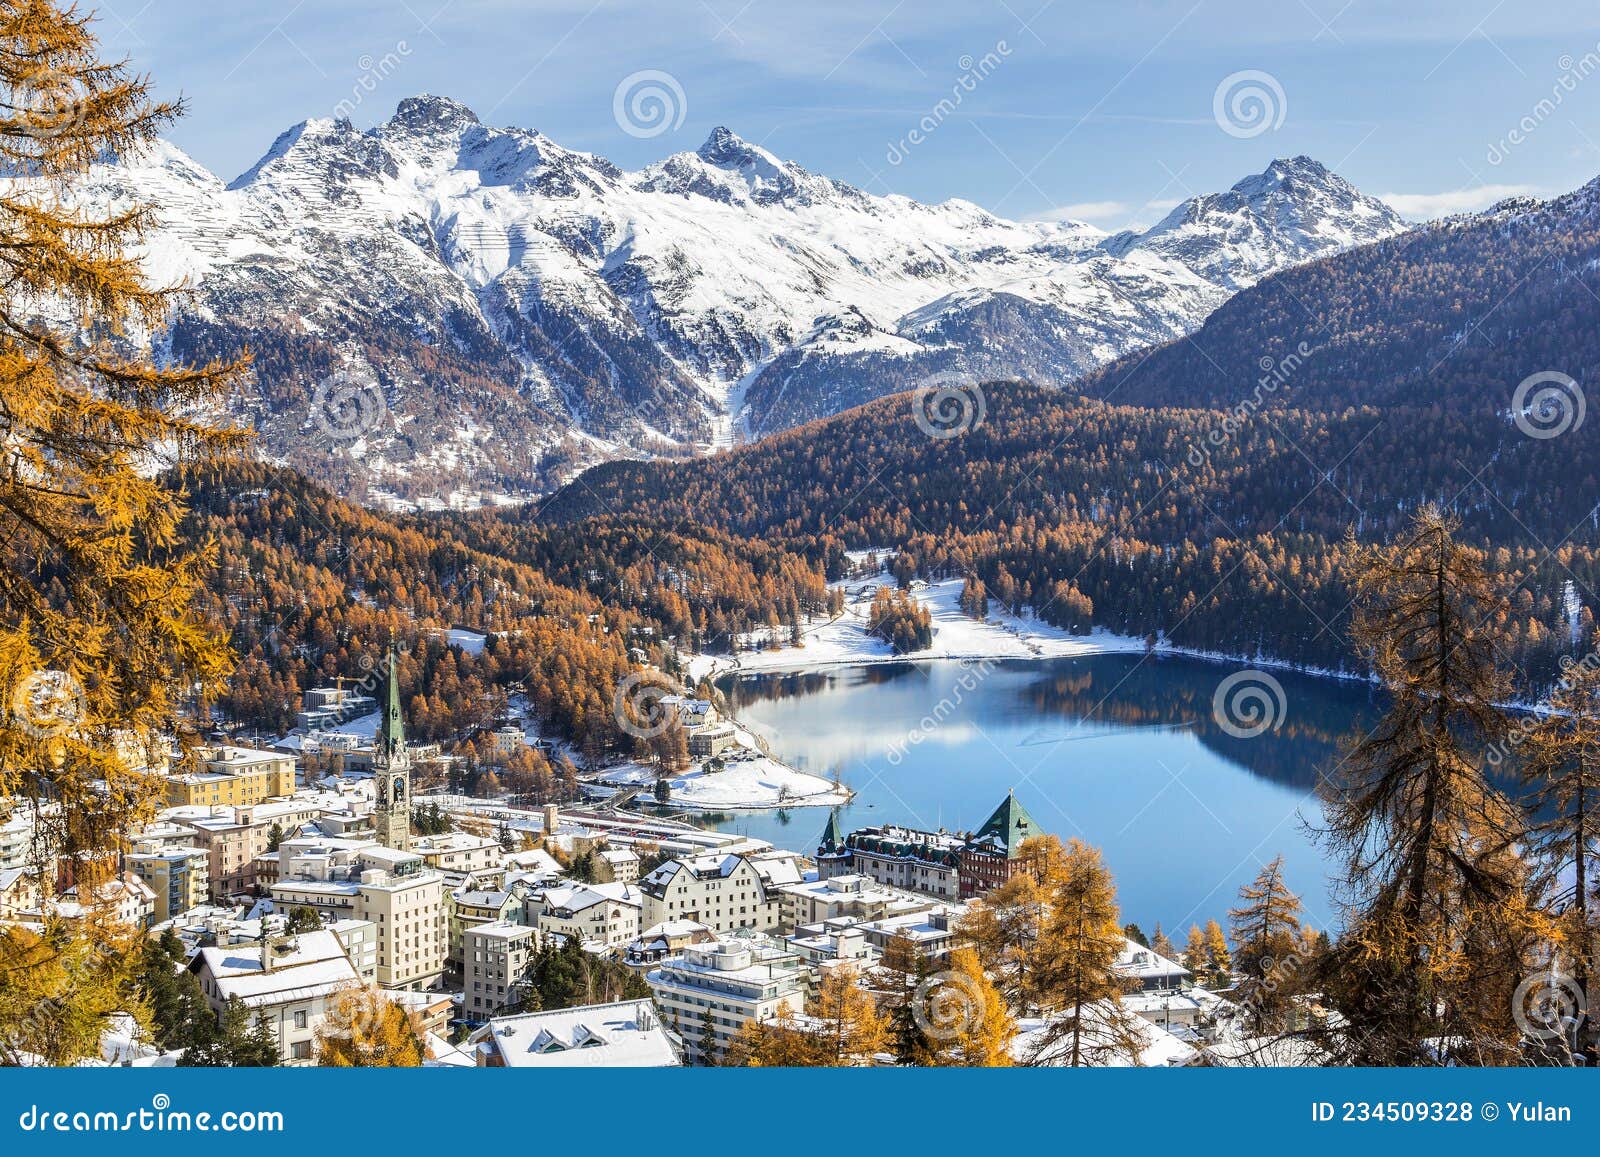 view of st. moritz, the famouse resort region from the high h